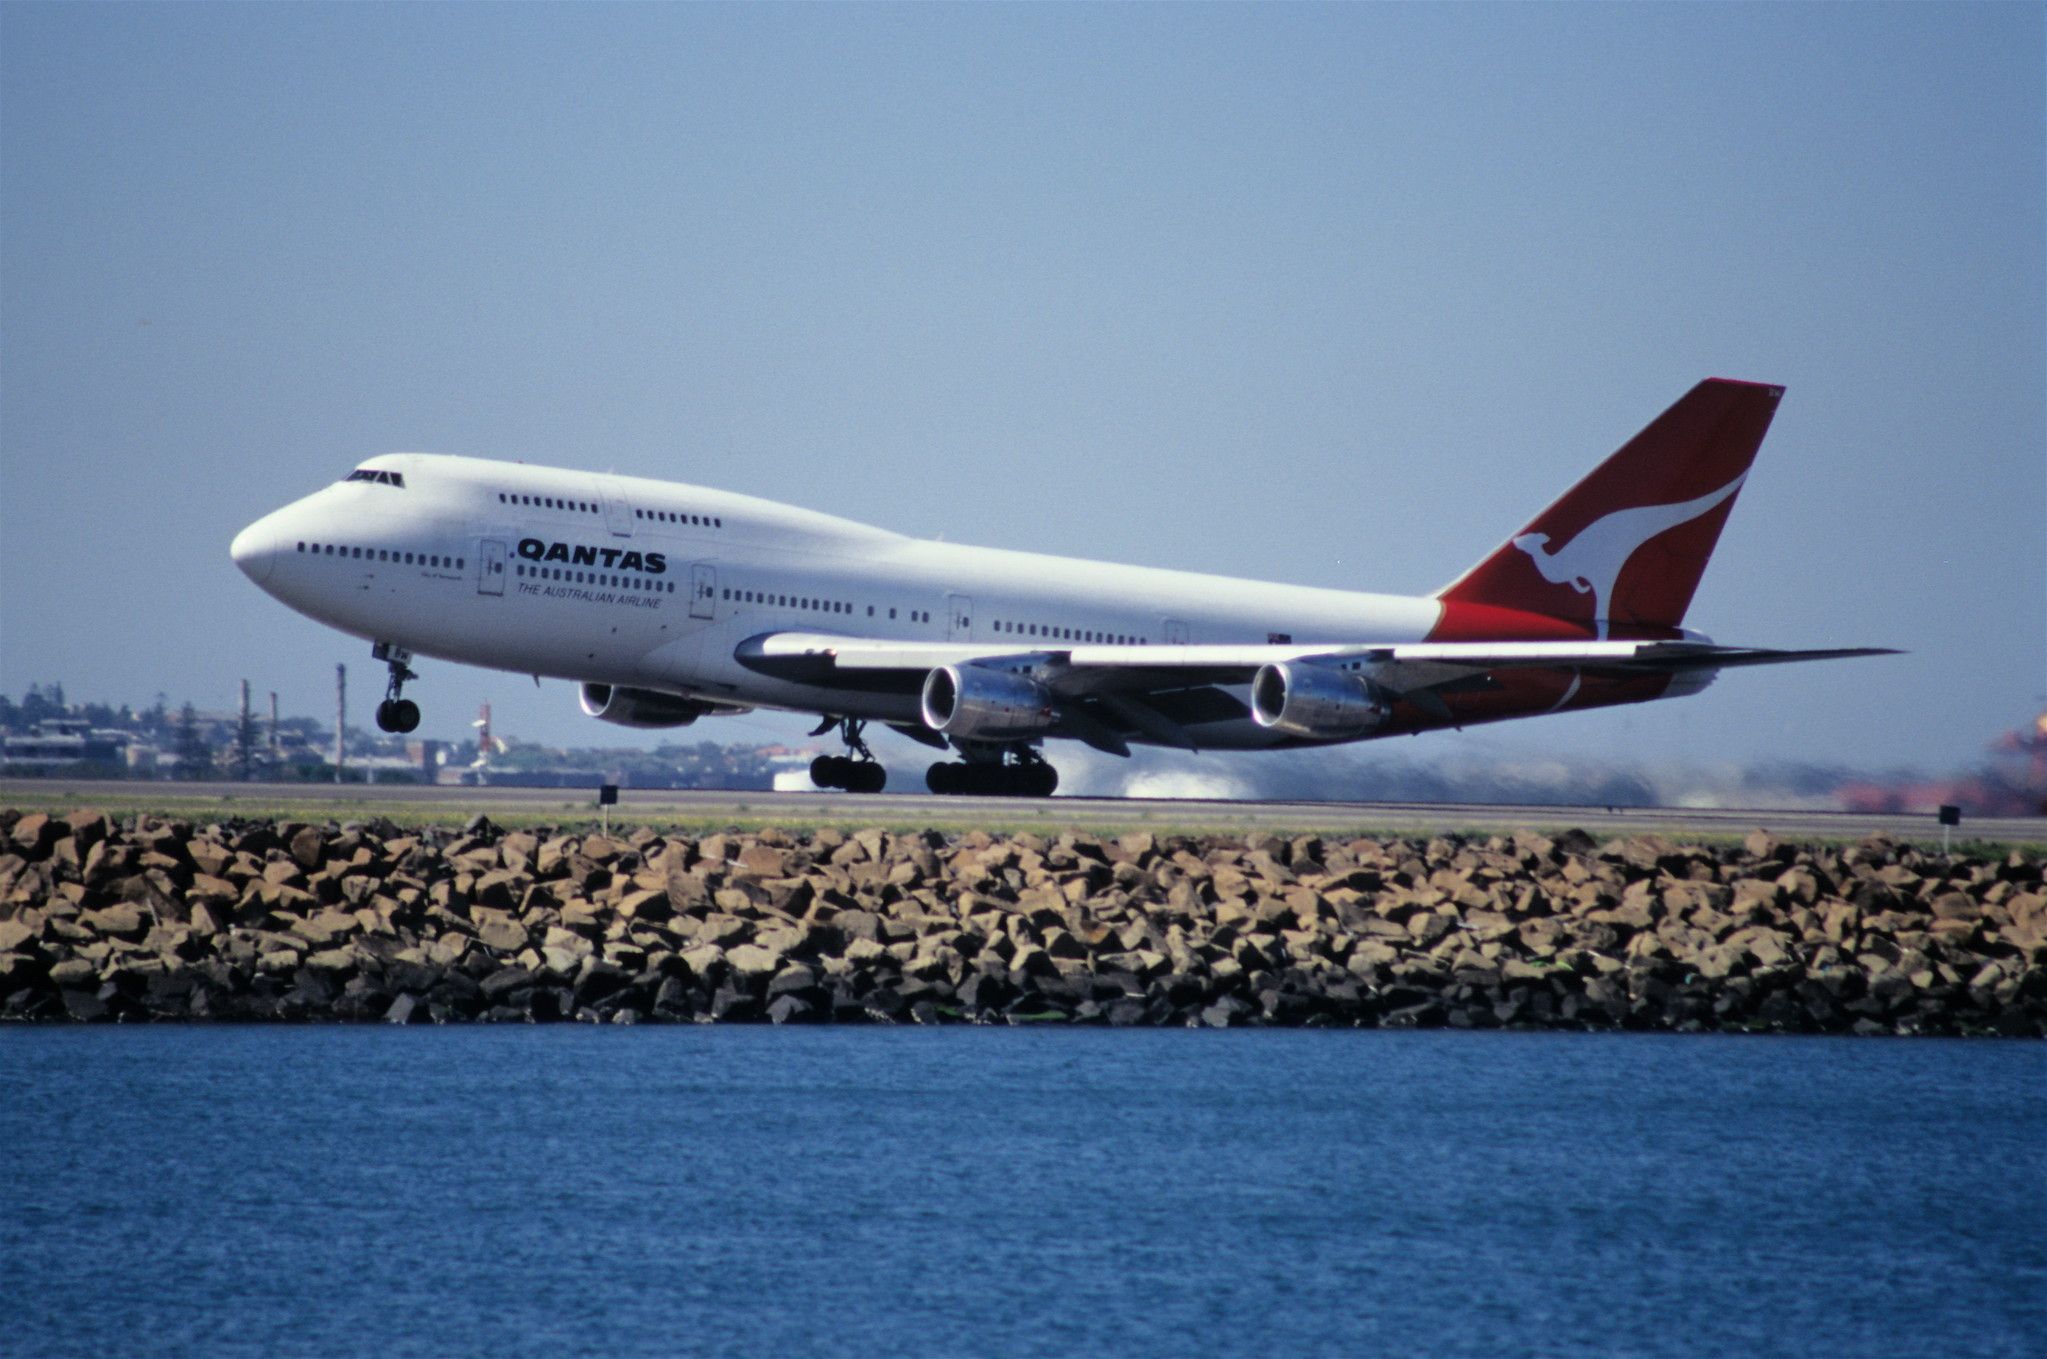 A Qantas Boeing 747-300 taking off from Sydney airport.